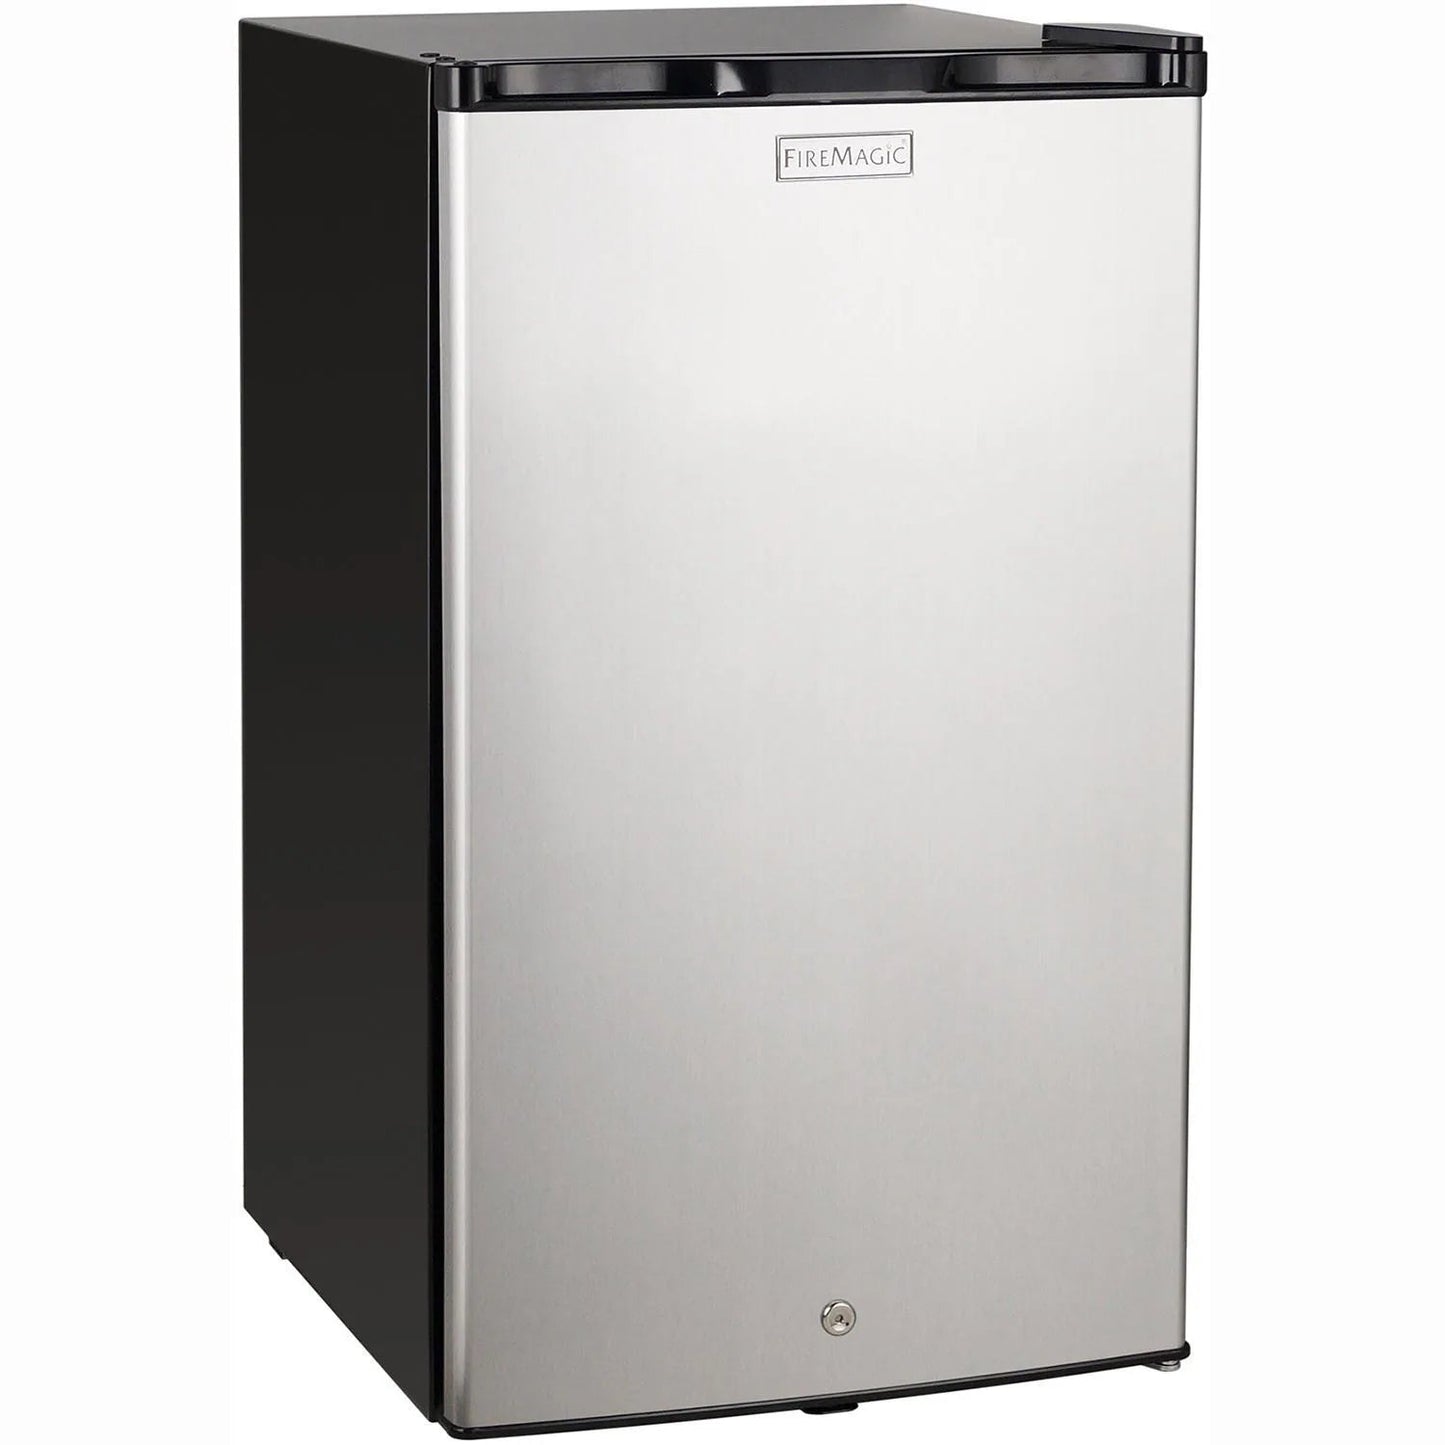 Fire Magic 20-Inch 4.0 Cu. Ft. Compact Refrigerator - Stainless Steel Door / Black Cabinet - Sunzout Outdoor Spaces LLC